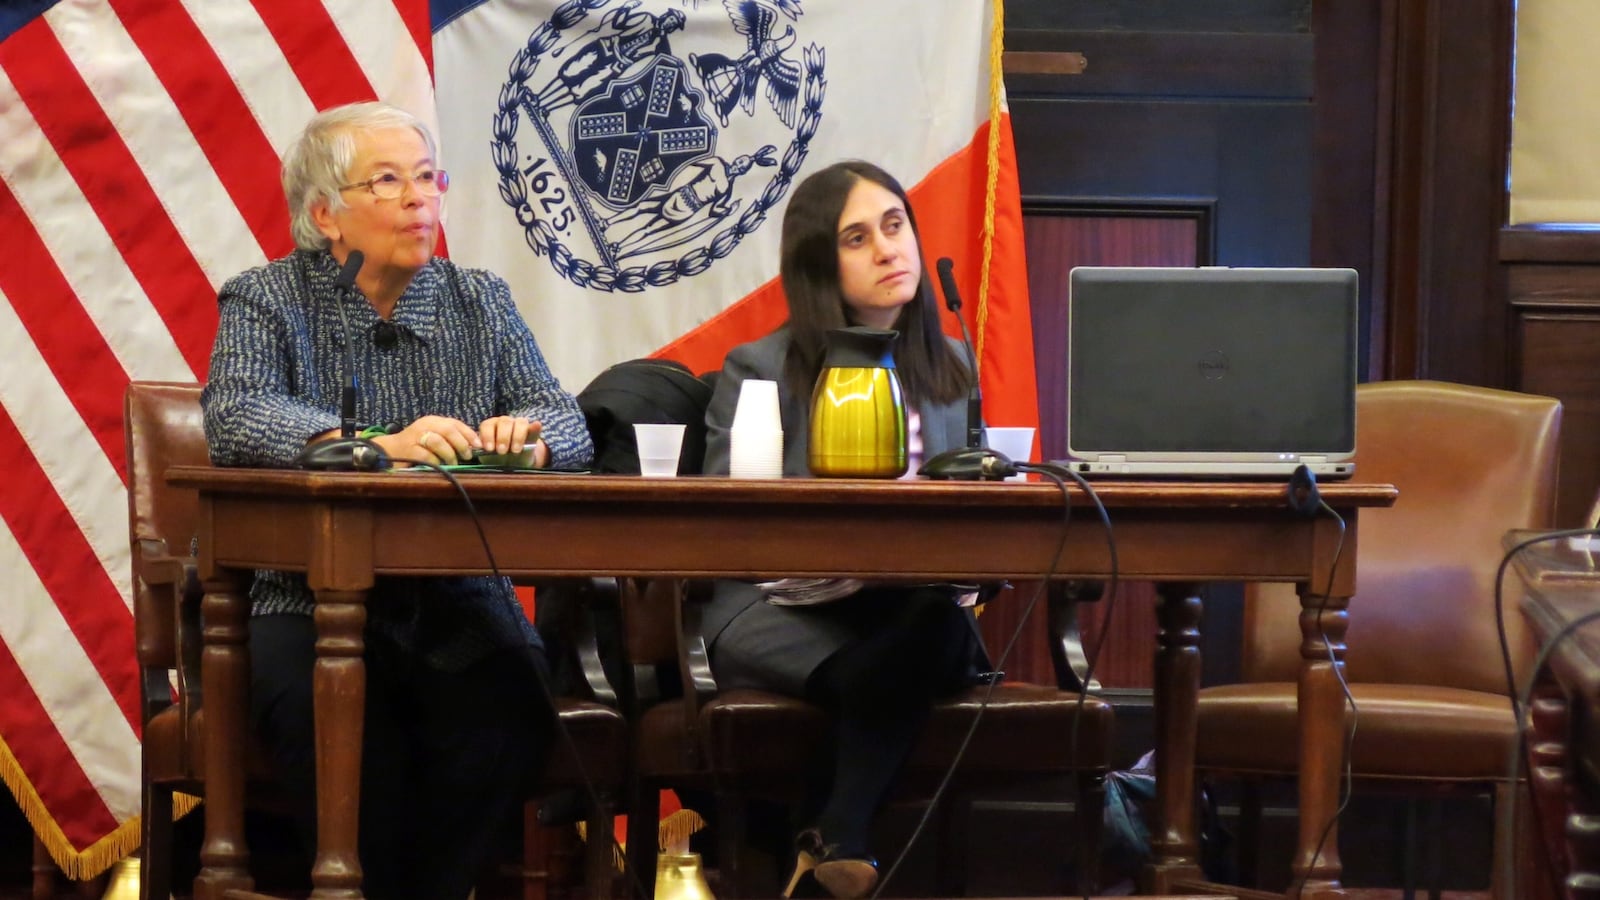 Chancellor Carmen Fariña and Sophia Pappas, the city's executive director of early childhood education, testified before the City Council.